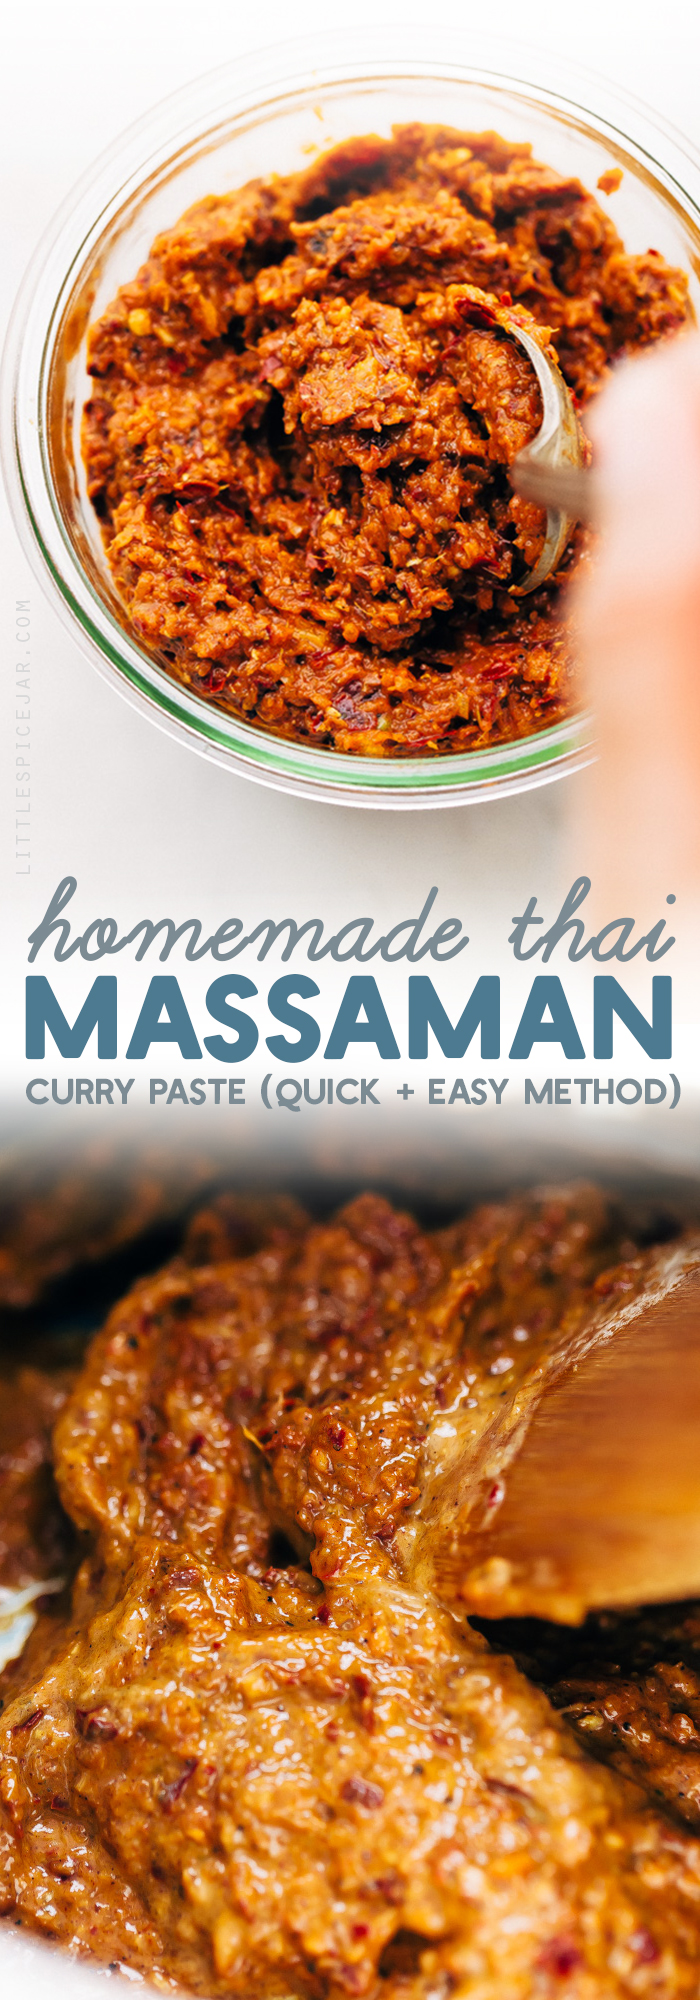 Homemade Thai Massaman Curry Paste - A quick 15 minute paste that's perfect to use in all kinds of curries! This can also be made vegan/vegetarian friendly. #massamancurry #homemadecurrypaste #thaicurry #massamancurrypaste | Littlespicejar.com